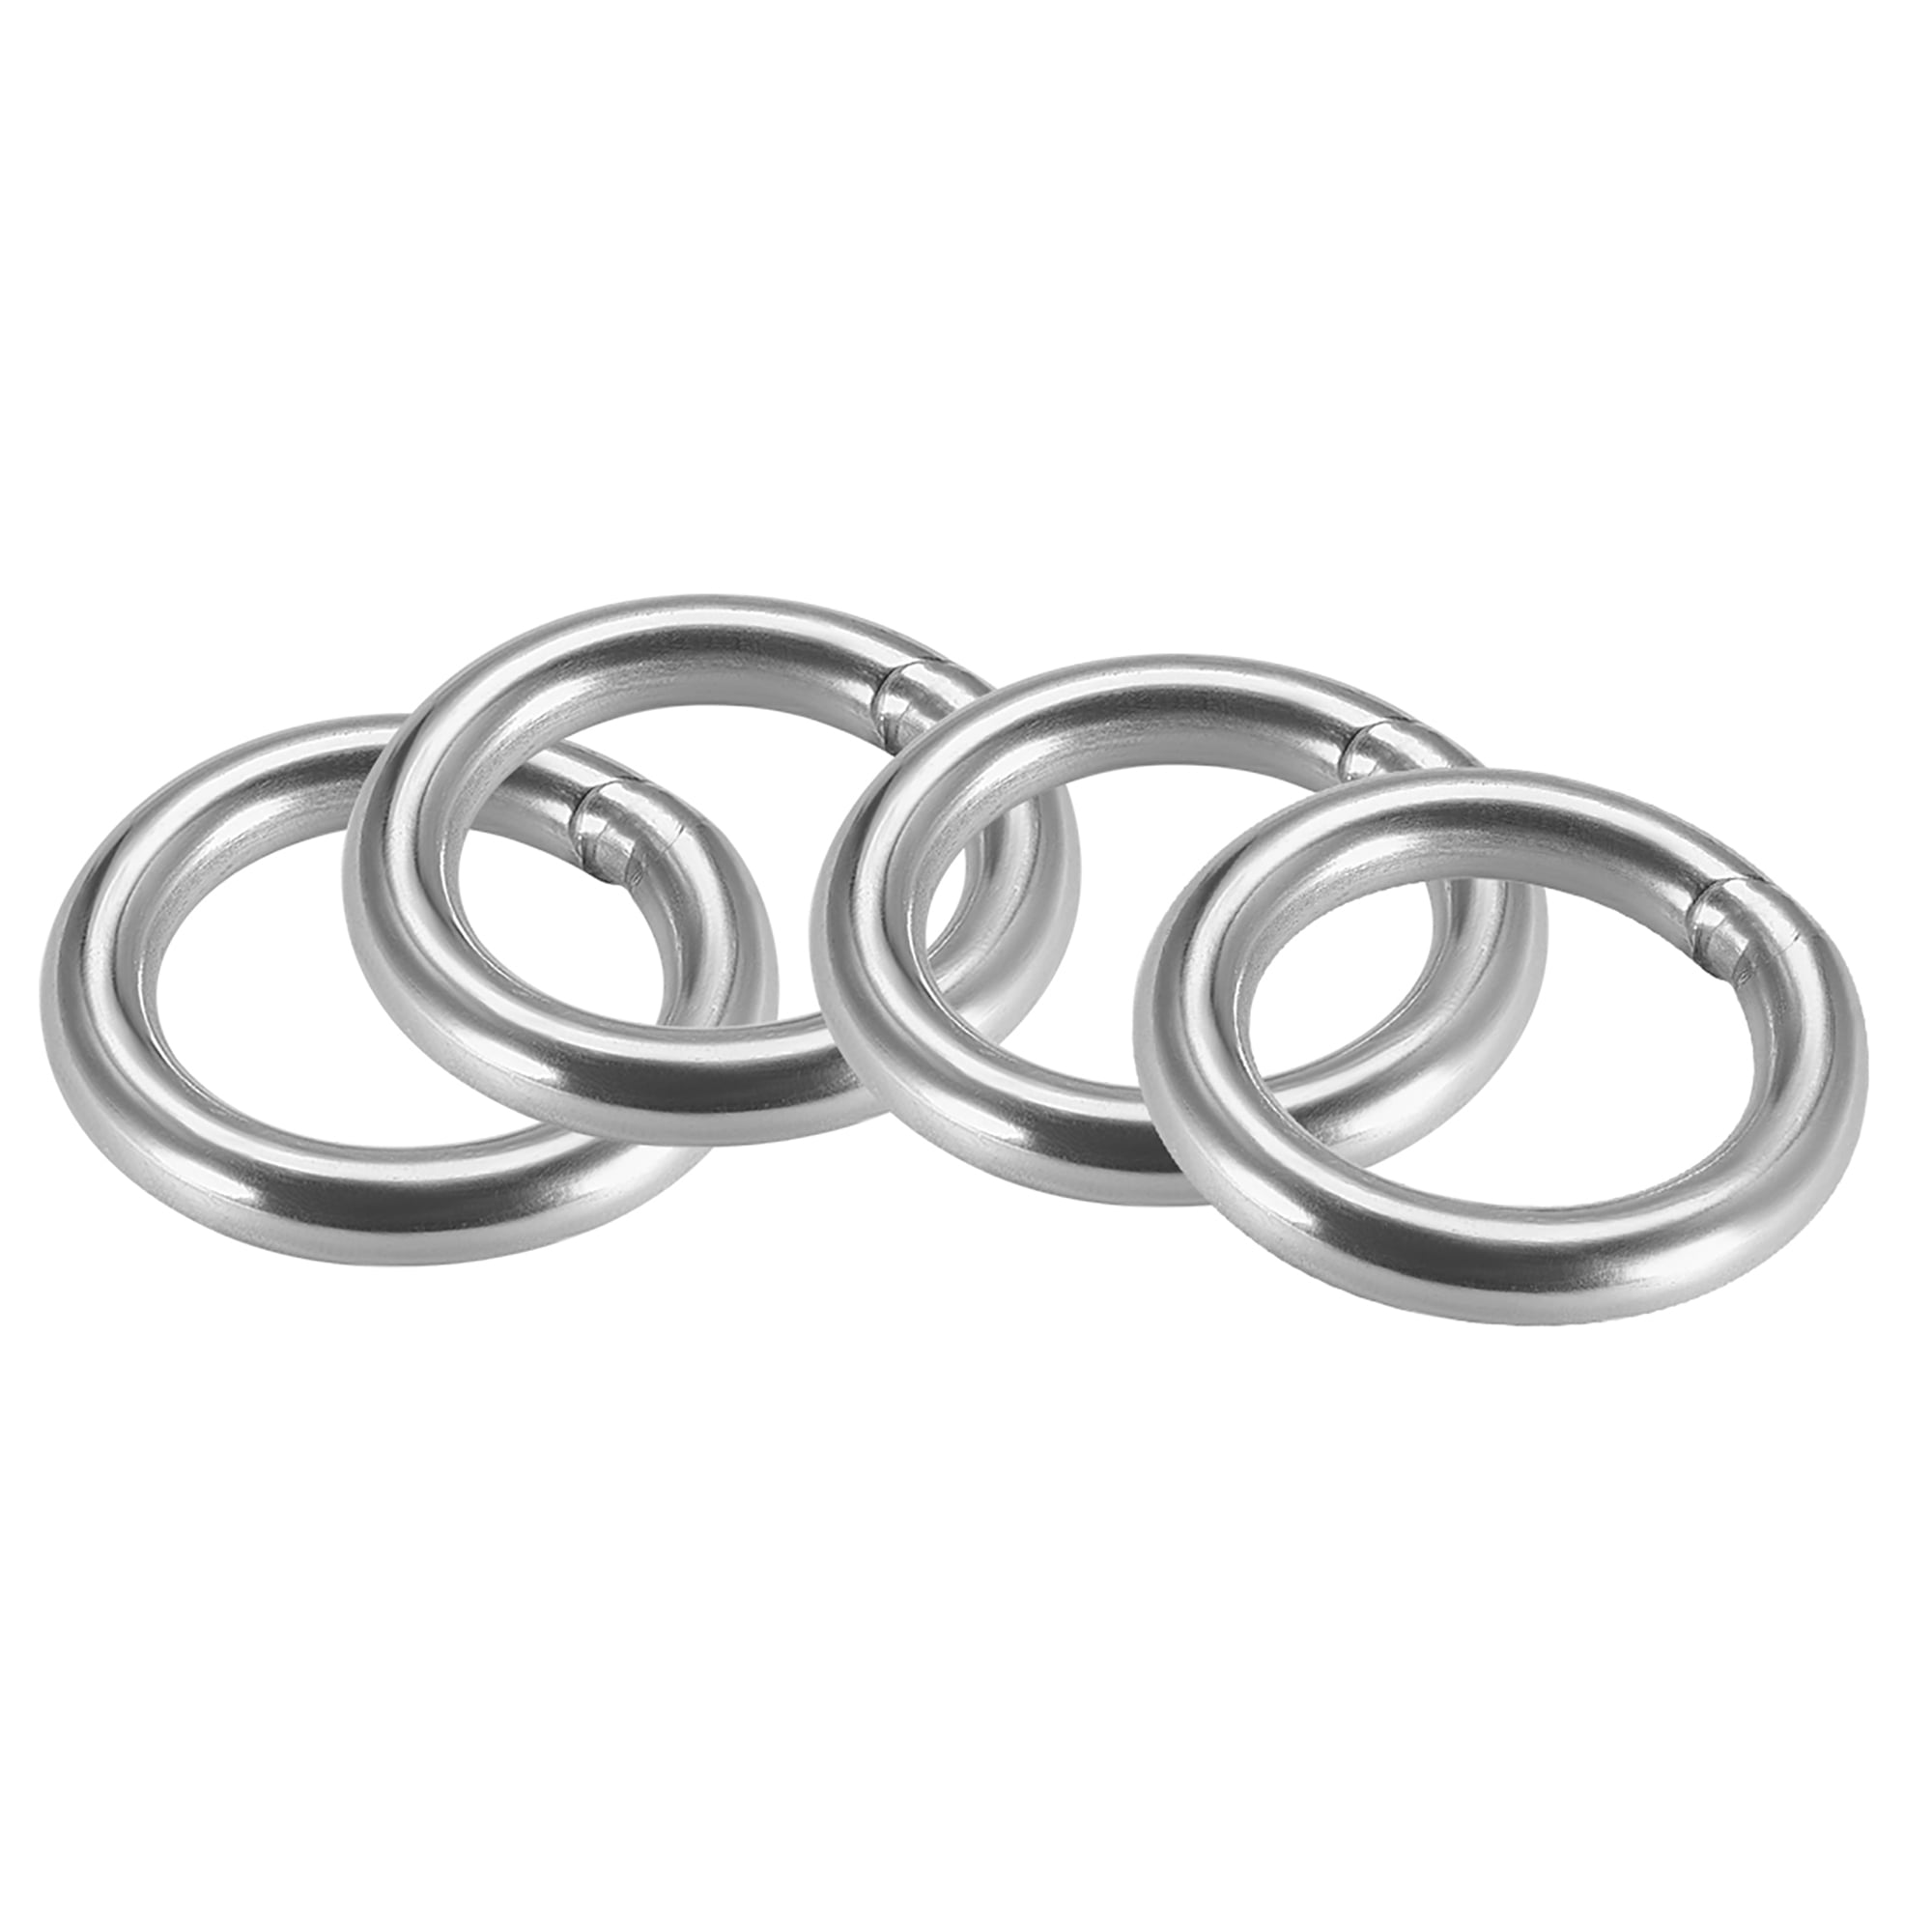 Unique Bargains - Welded O Ring, 50 x 8mm Strapping Round Rings ...